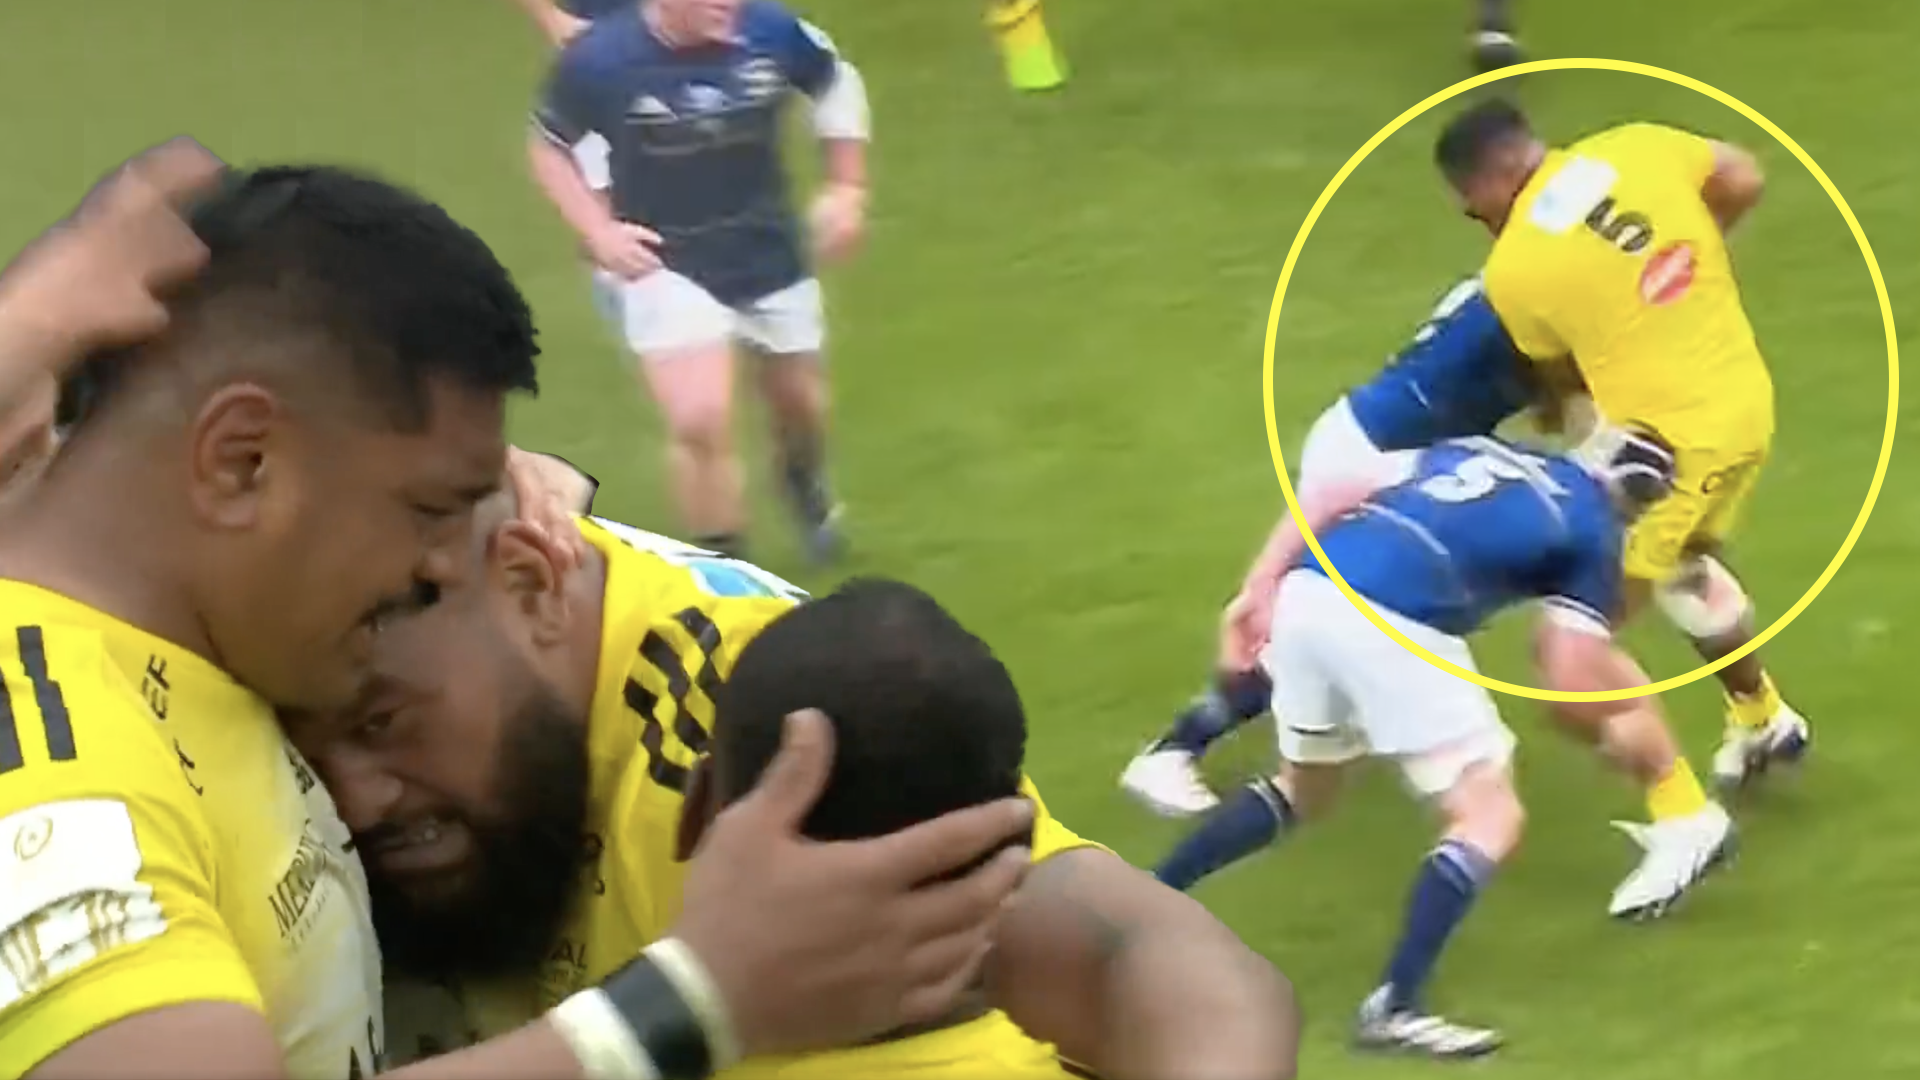 Even Leinster fans are applauding this act of heroism from Will Skelton